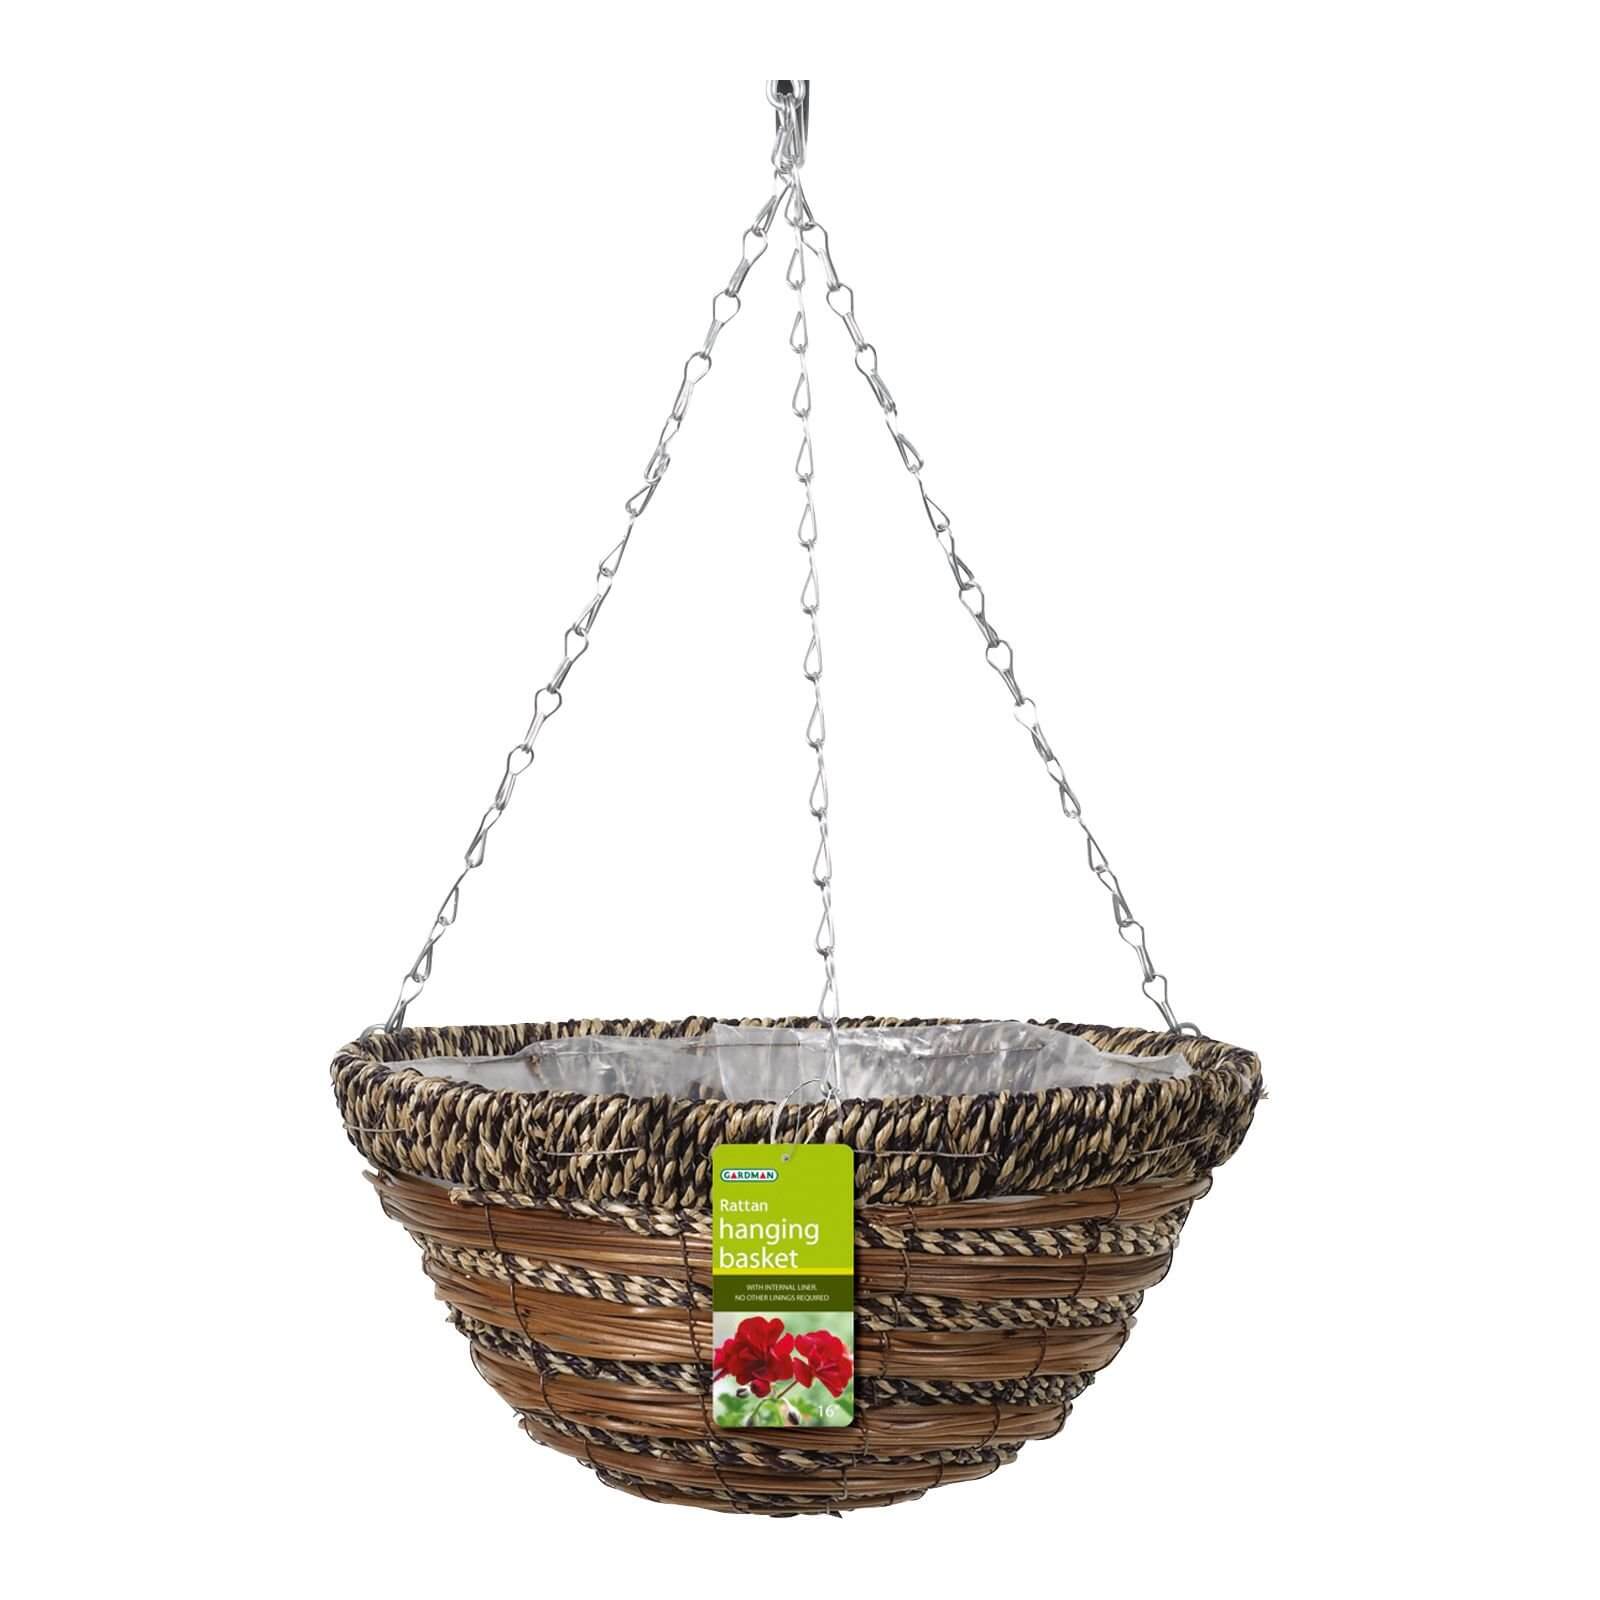 Rattan Hanging Basket Rope and Fern